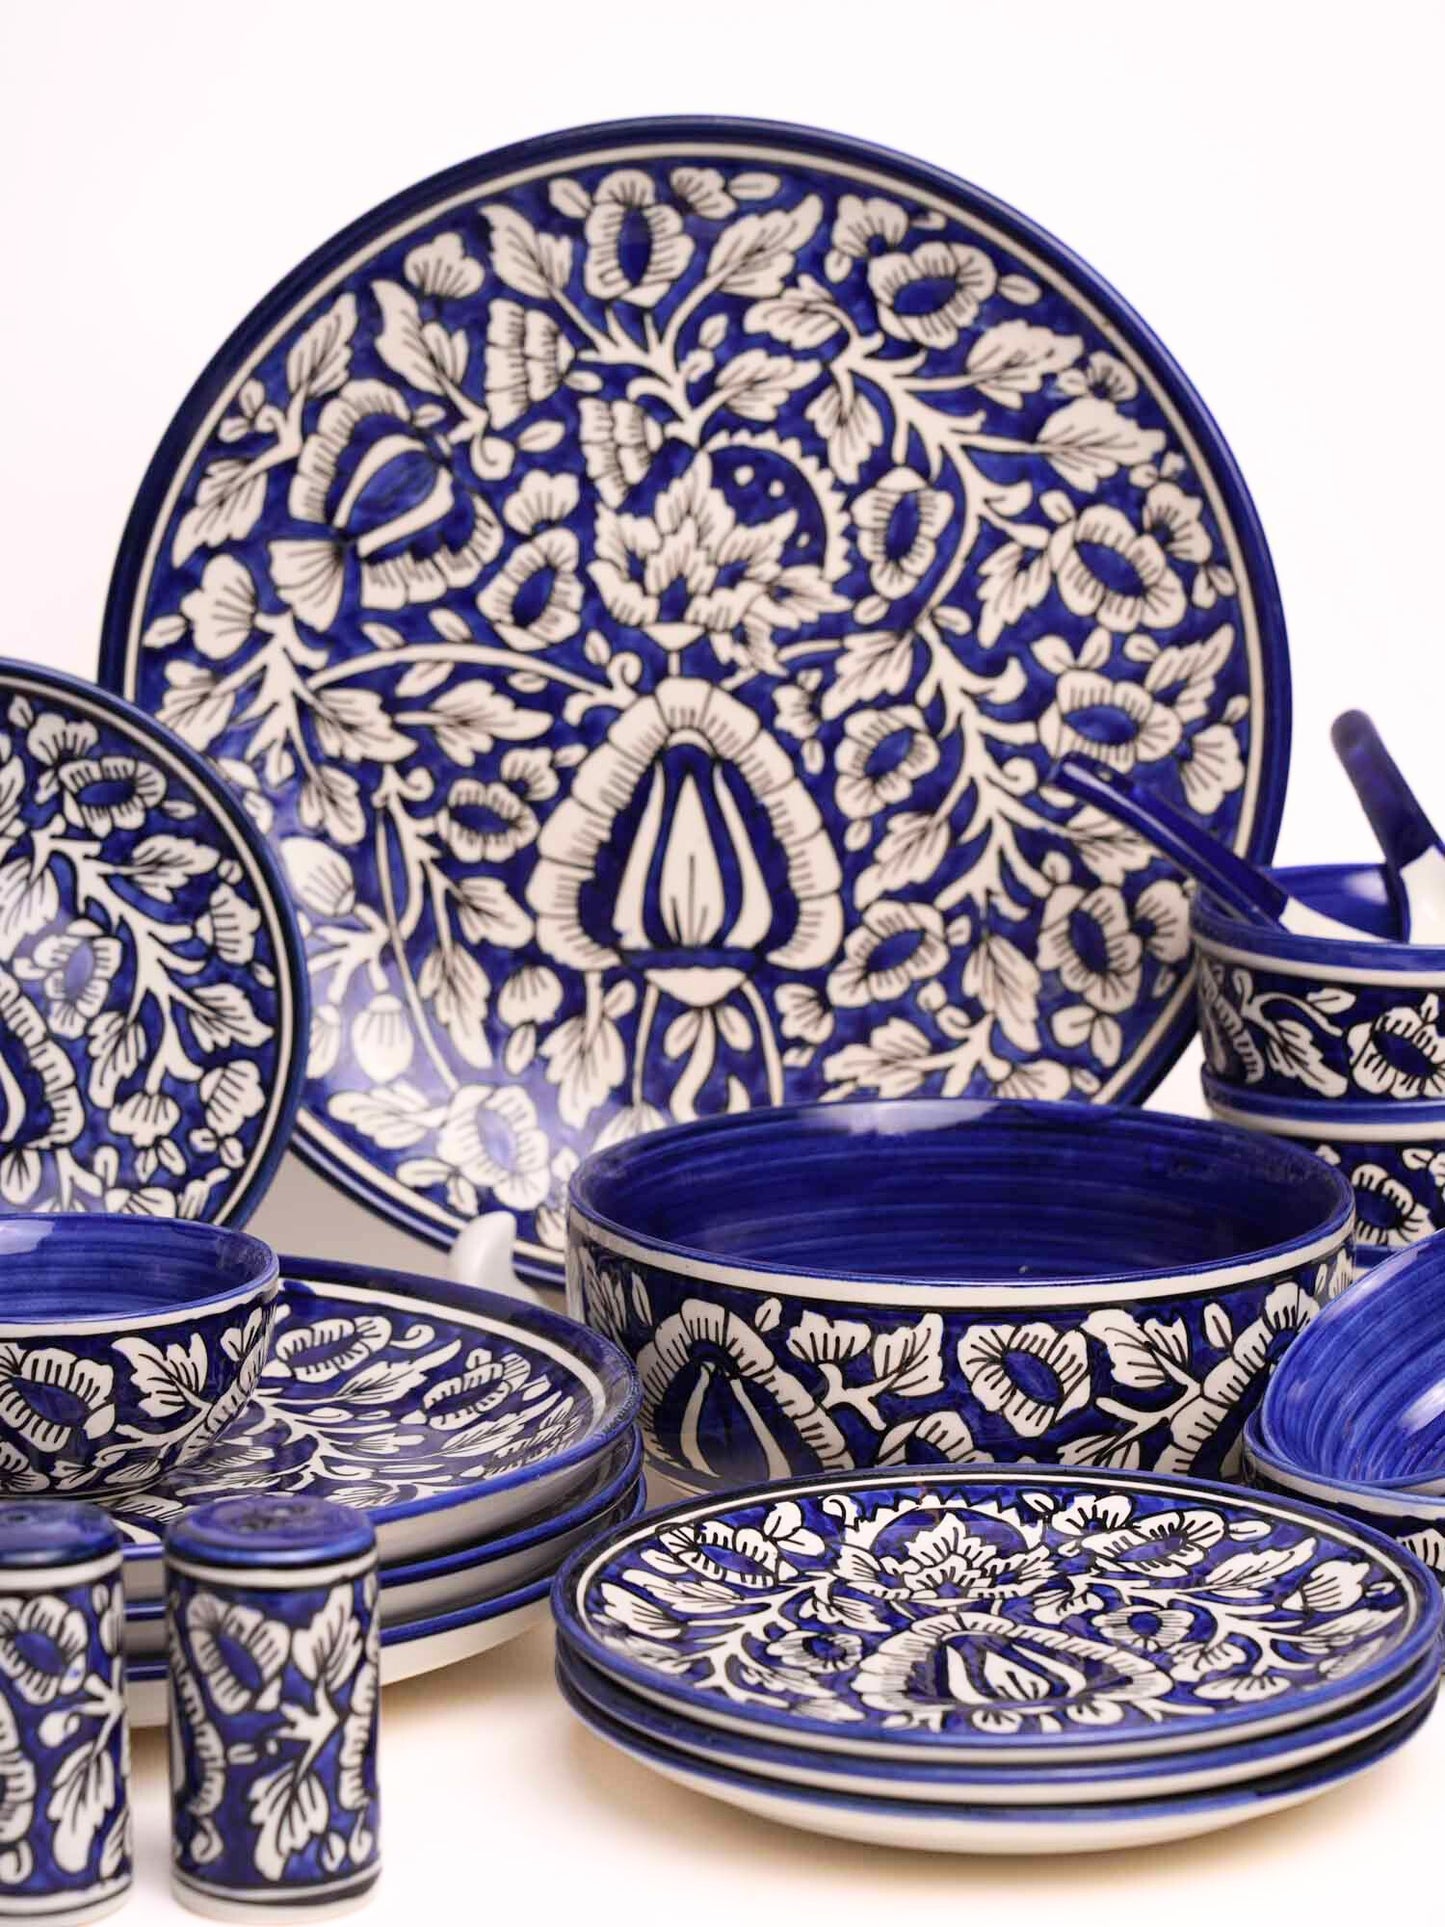 Mughal Art Dinner Set for 4 - 25 Pieces